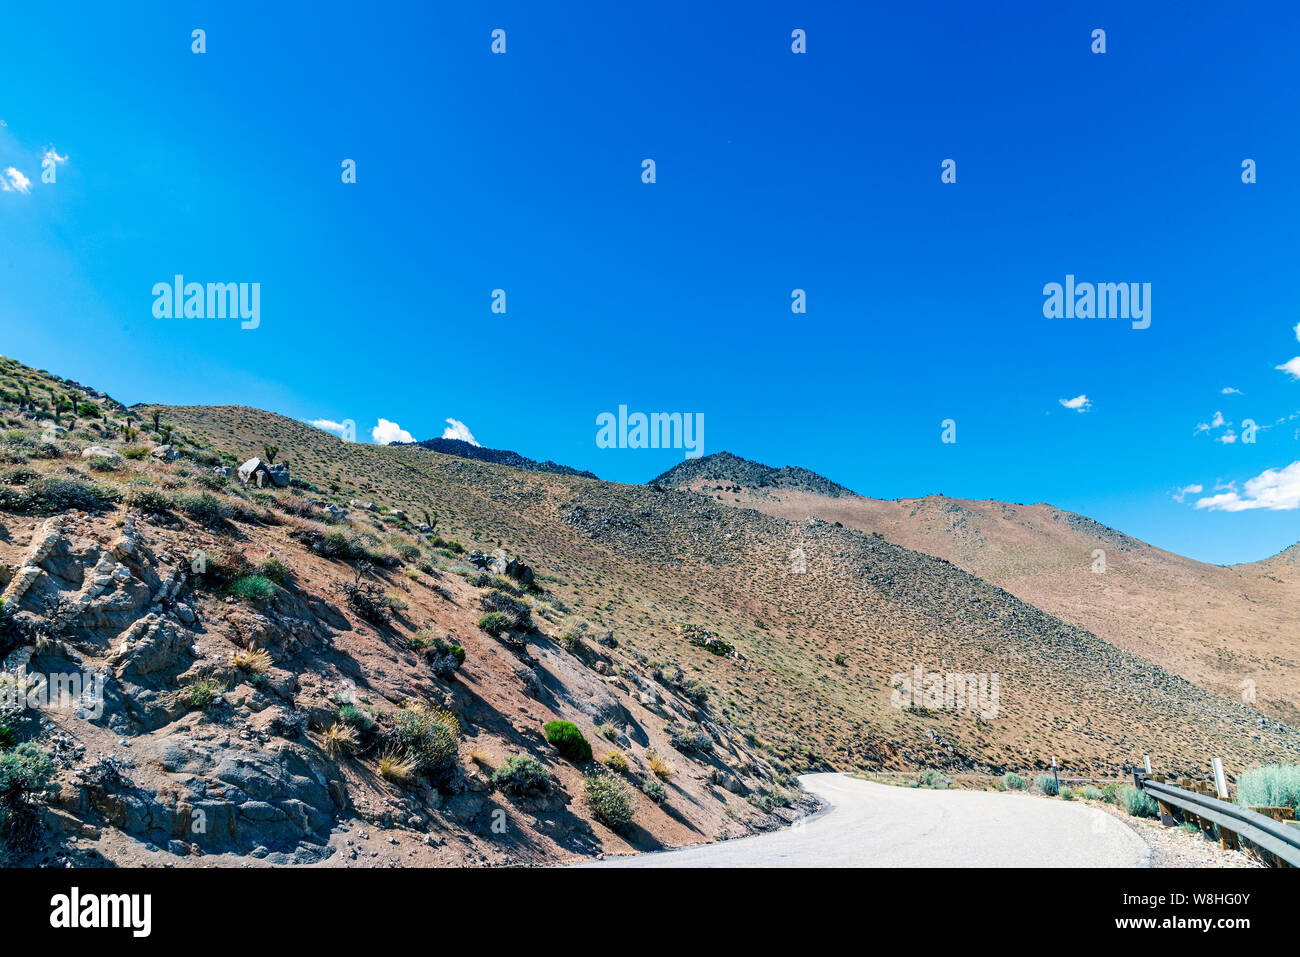 Narrow paved mountain road leading down mountain with guard rail. Desert rocky mountainside under bright blue sky. Stock Photo